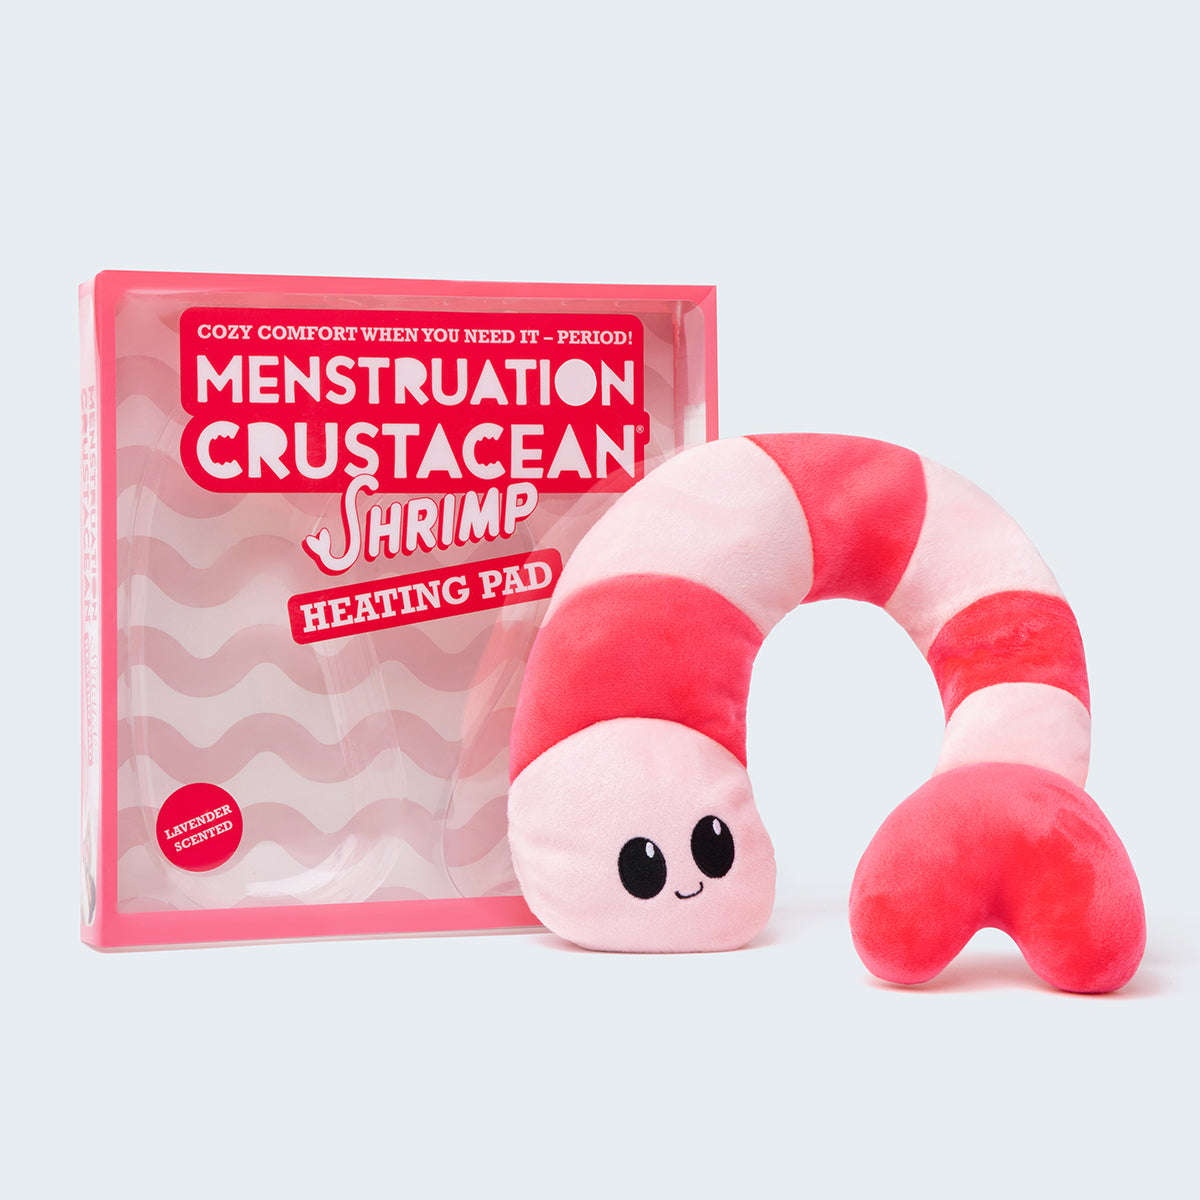 Menstruation Crustacean Shrimp: Microwavable Heating Pad for Period Cramps and Body Aches